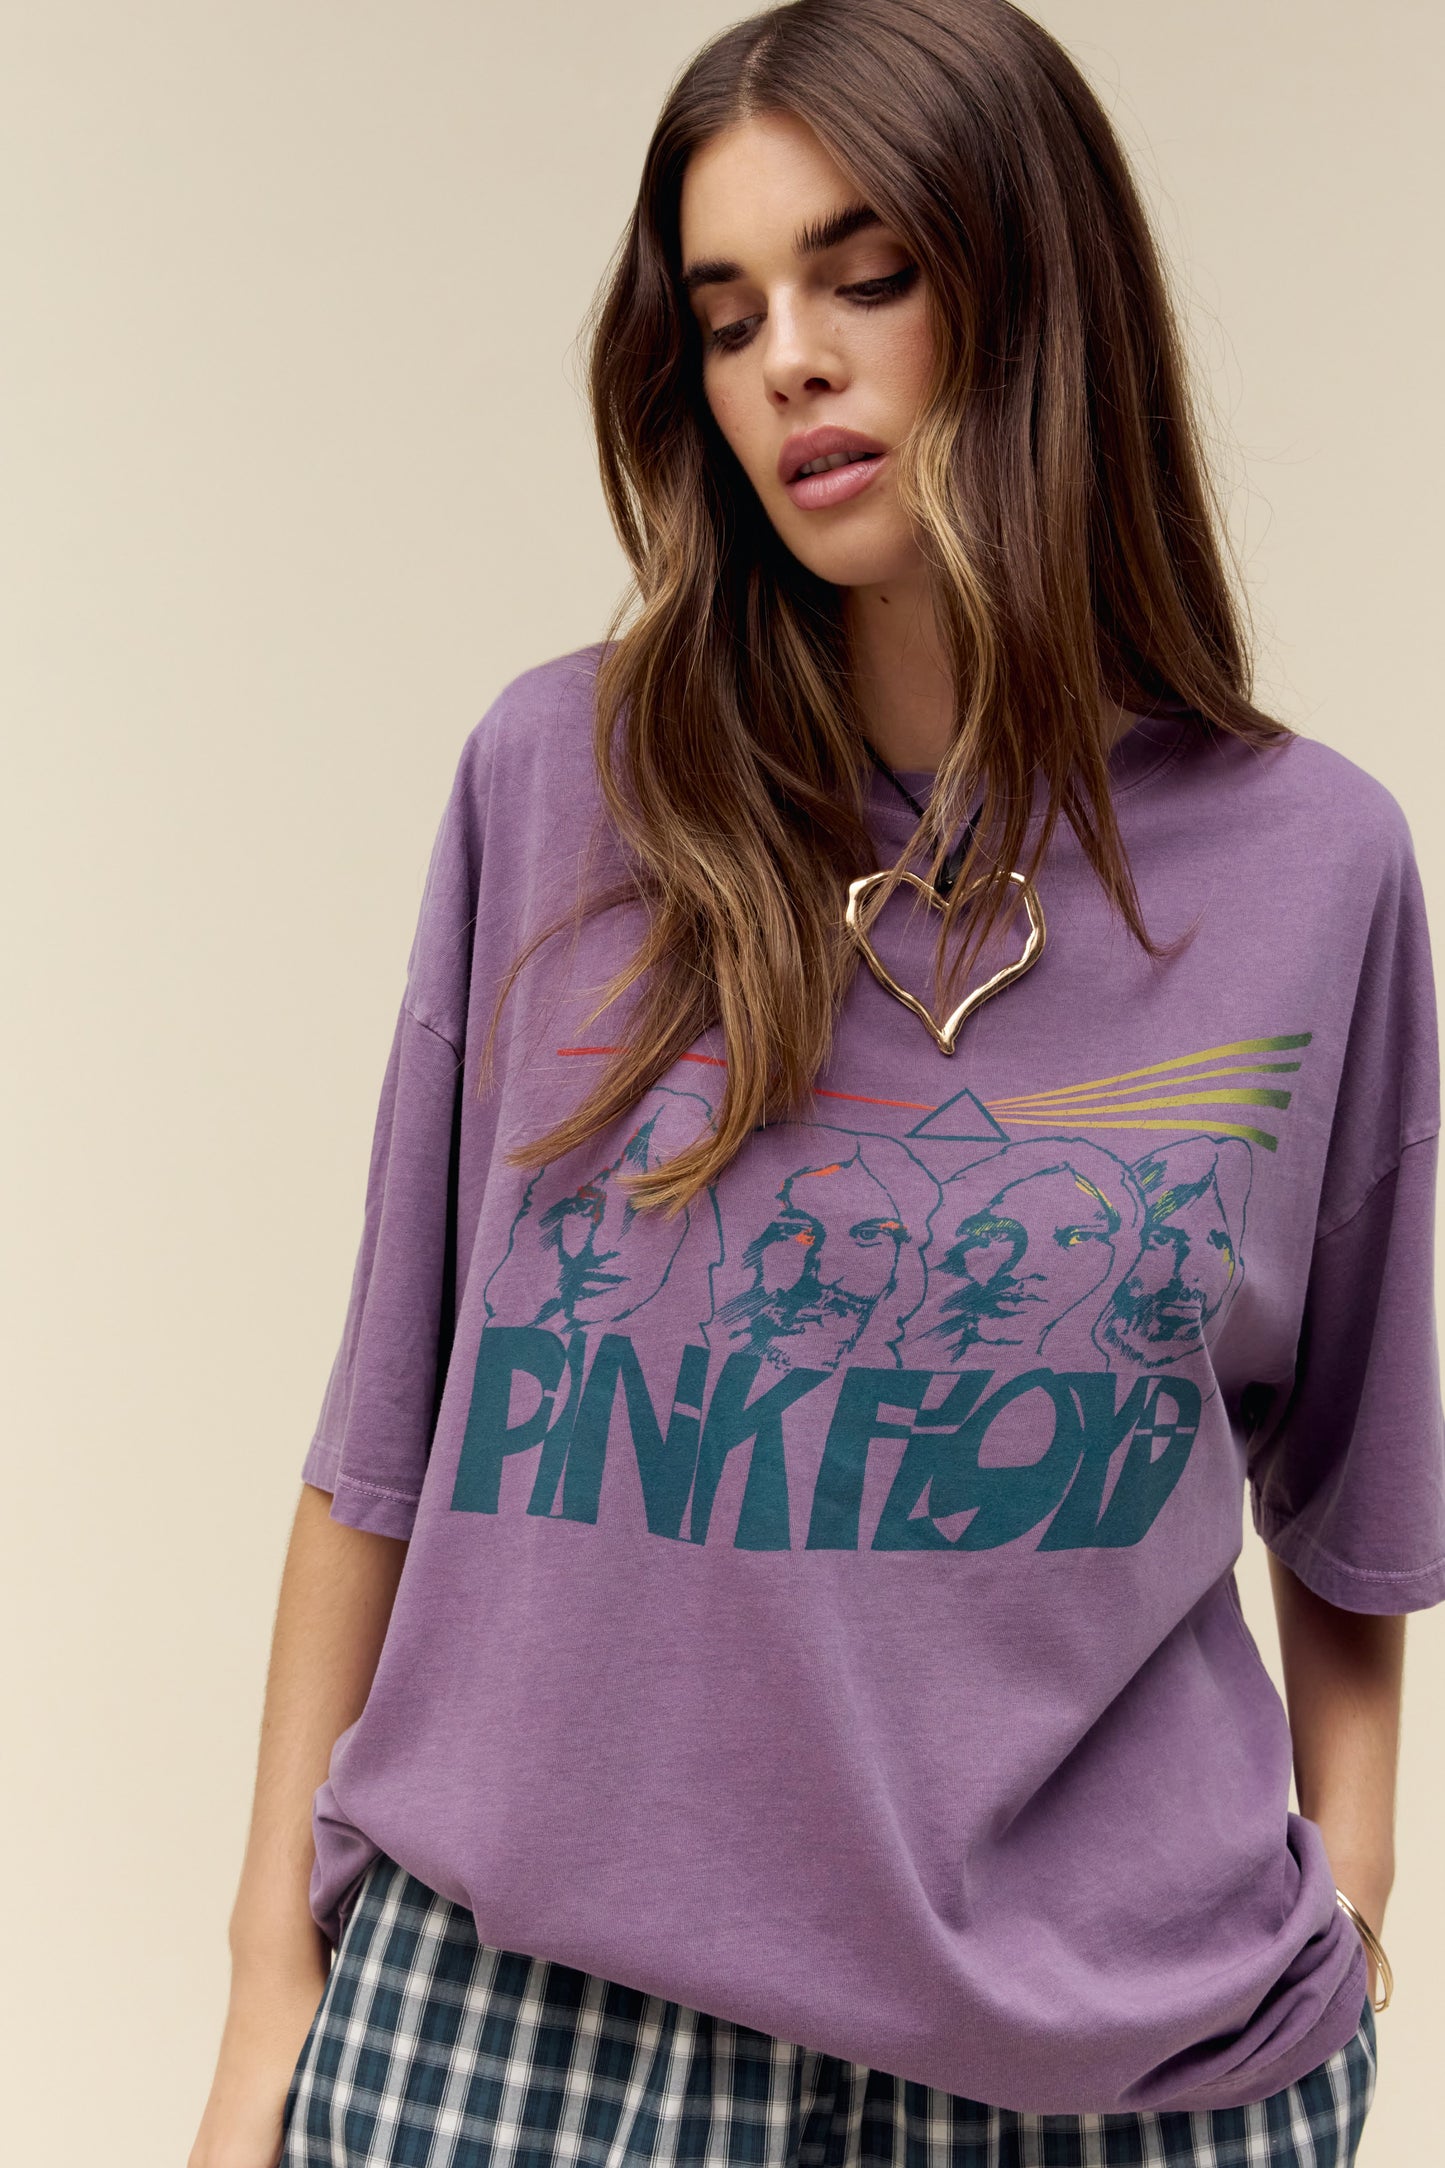 A model featuring a purple colored OS tee accented with "Pink Floyd" in warped font and their enduring light prism symbol.